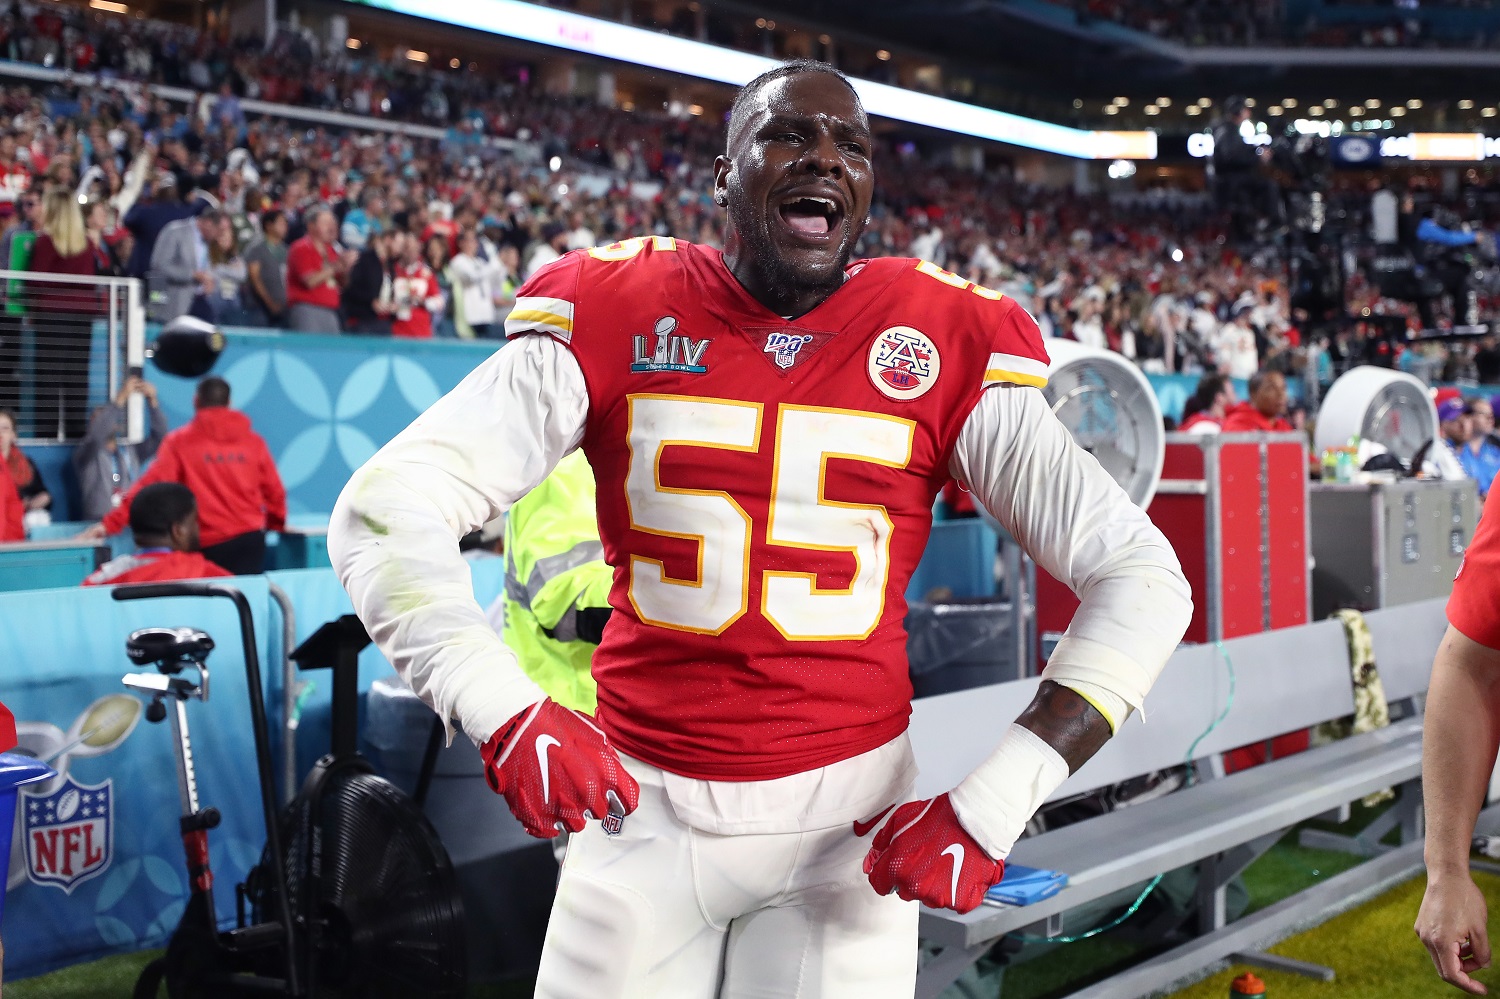 Frank Clark reacts after the Kansas City Chiefs defeated the San Francisco 49ers, 31-20, in Super Bowl 54. Jamie Squire/Getty Images